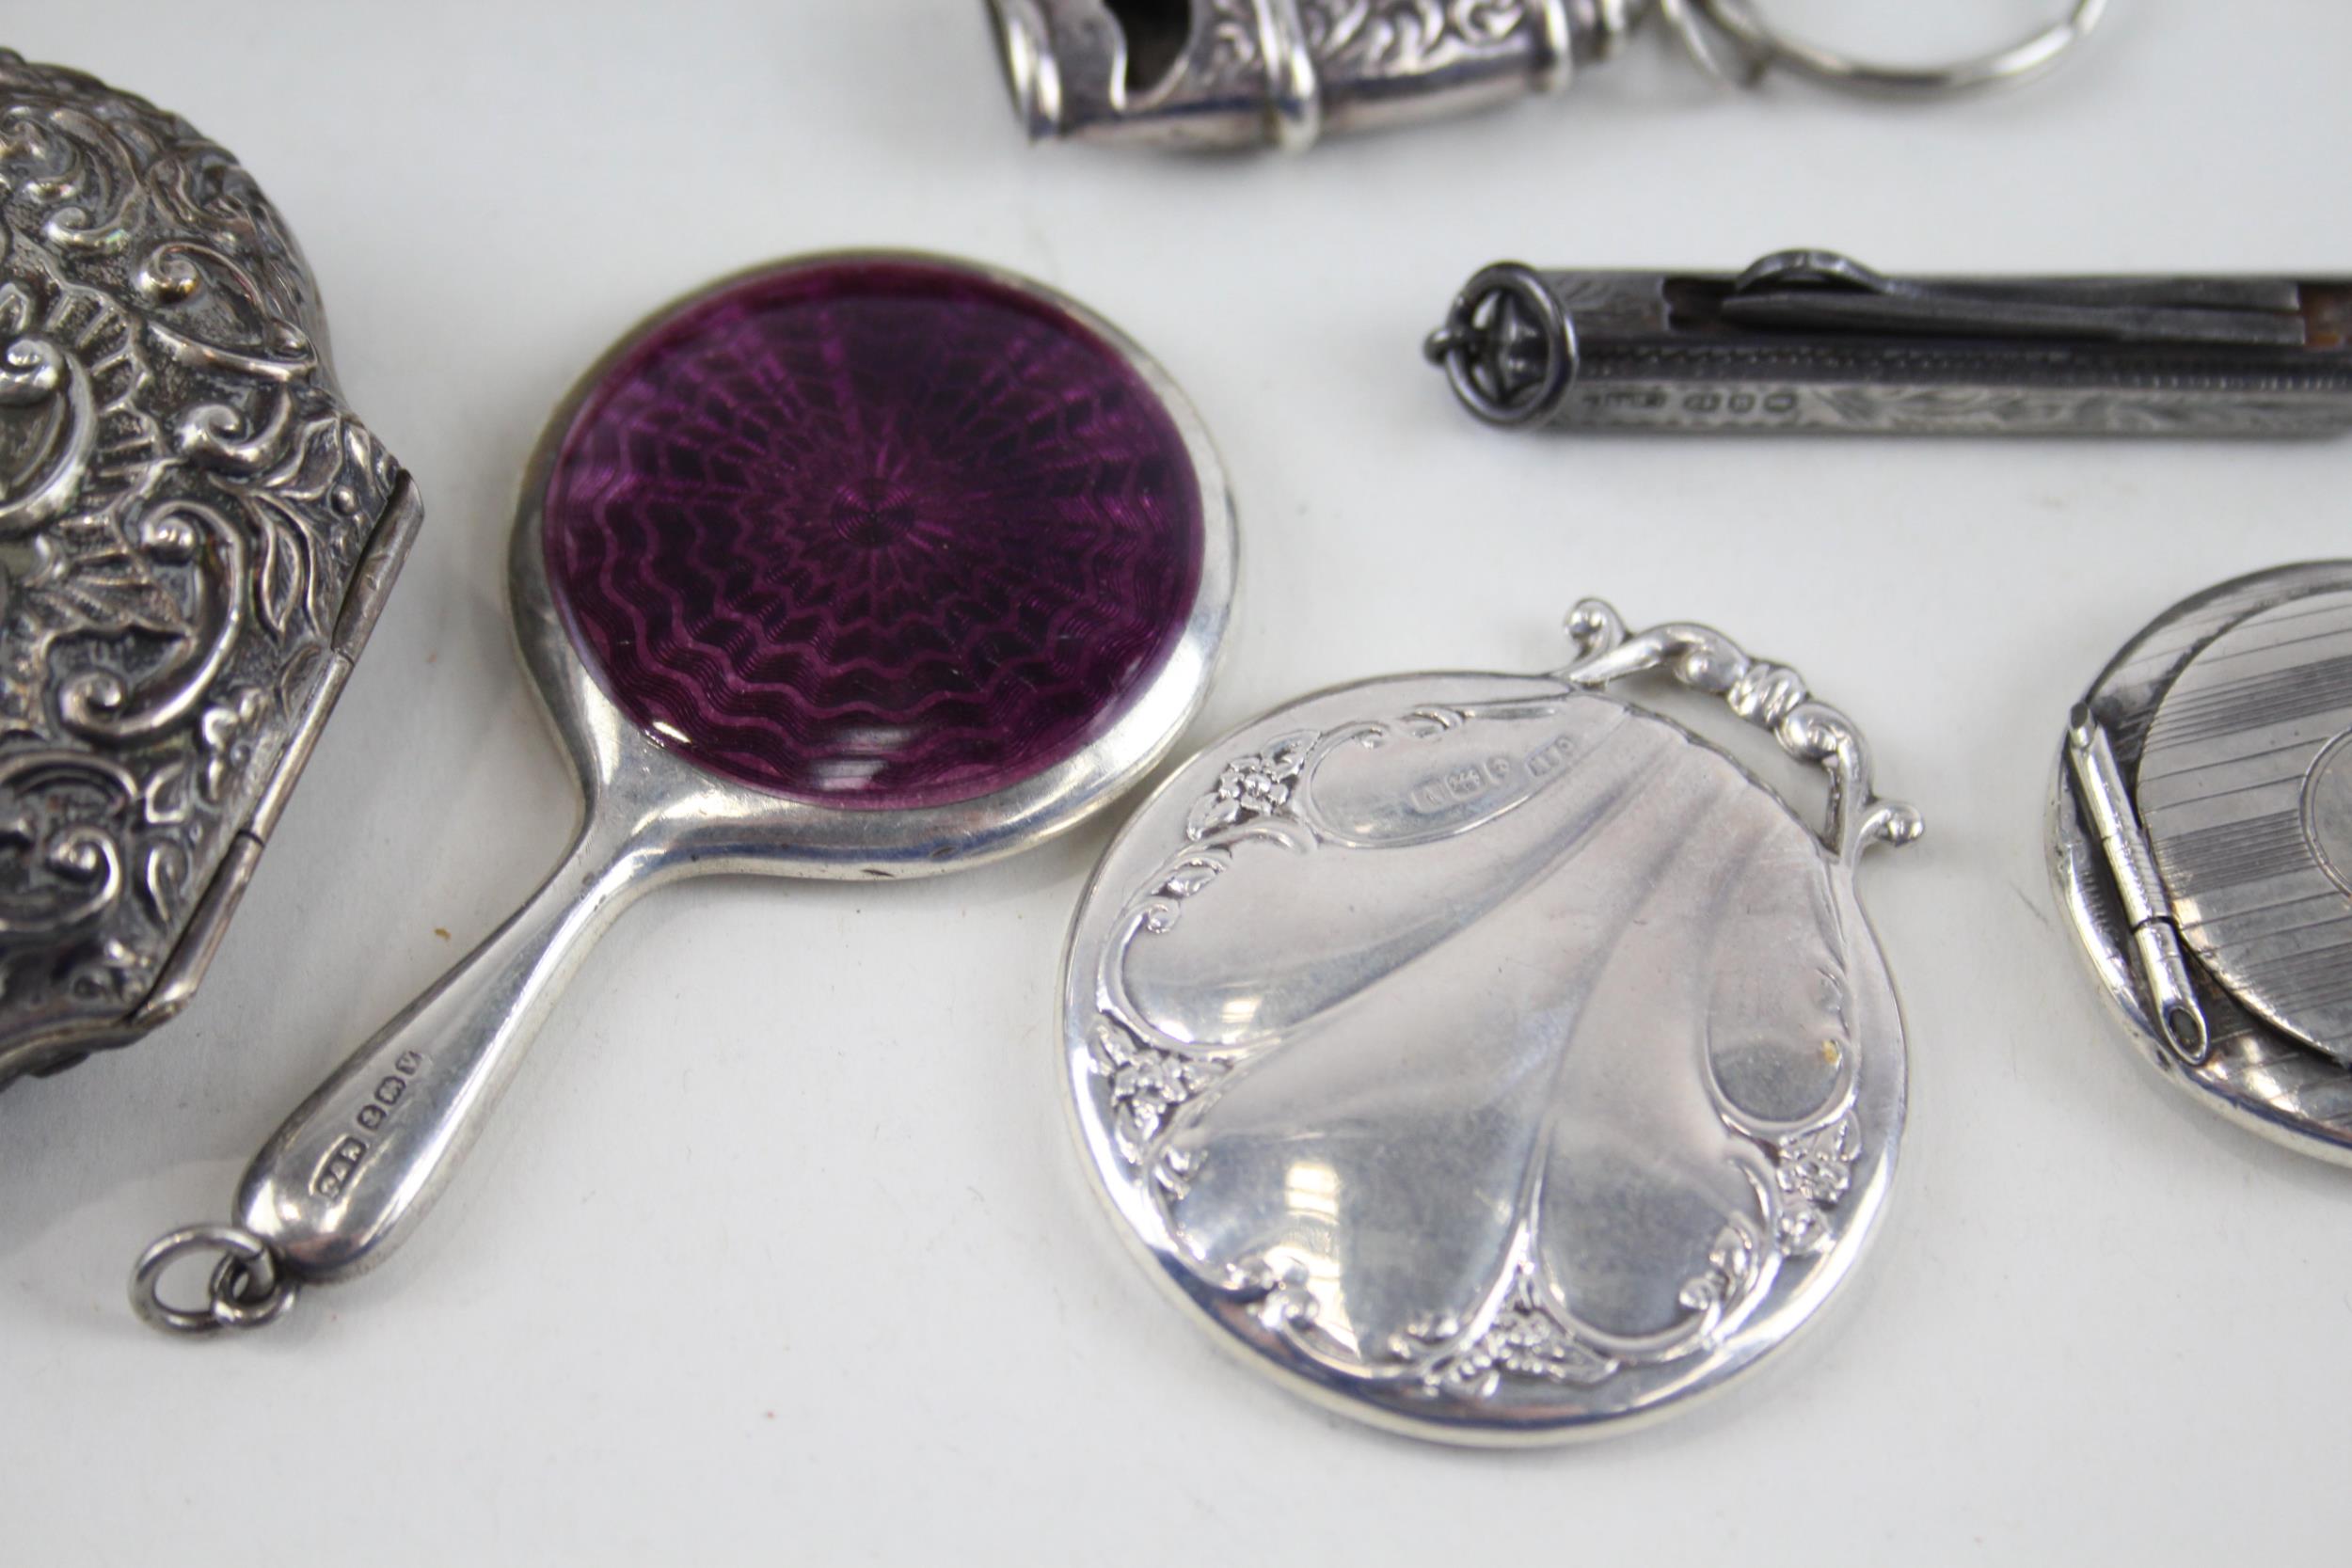 7 x Antique / Vintage Hallmarked .925 STERLING SILVER Vanity (147g) - Inc Guilloche Enamel, Whistle, - Image 4 of 7